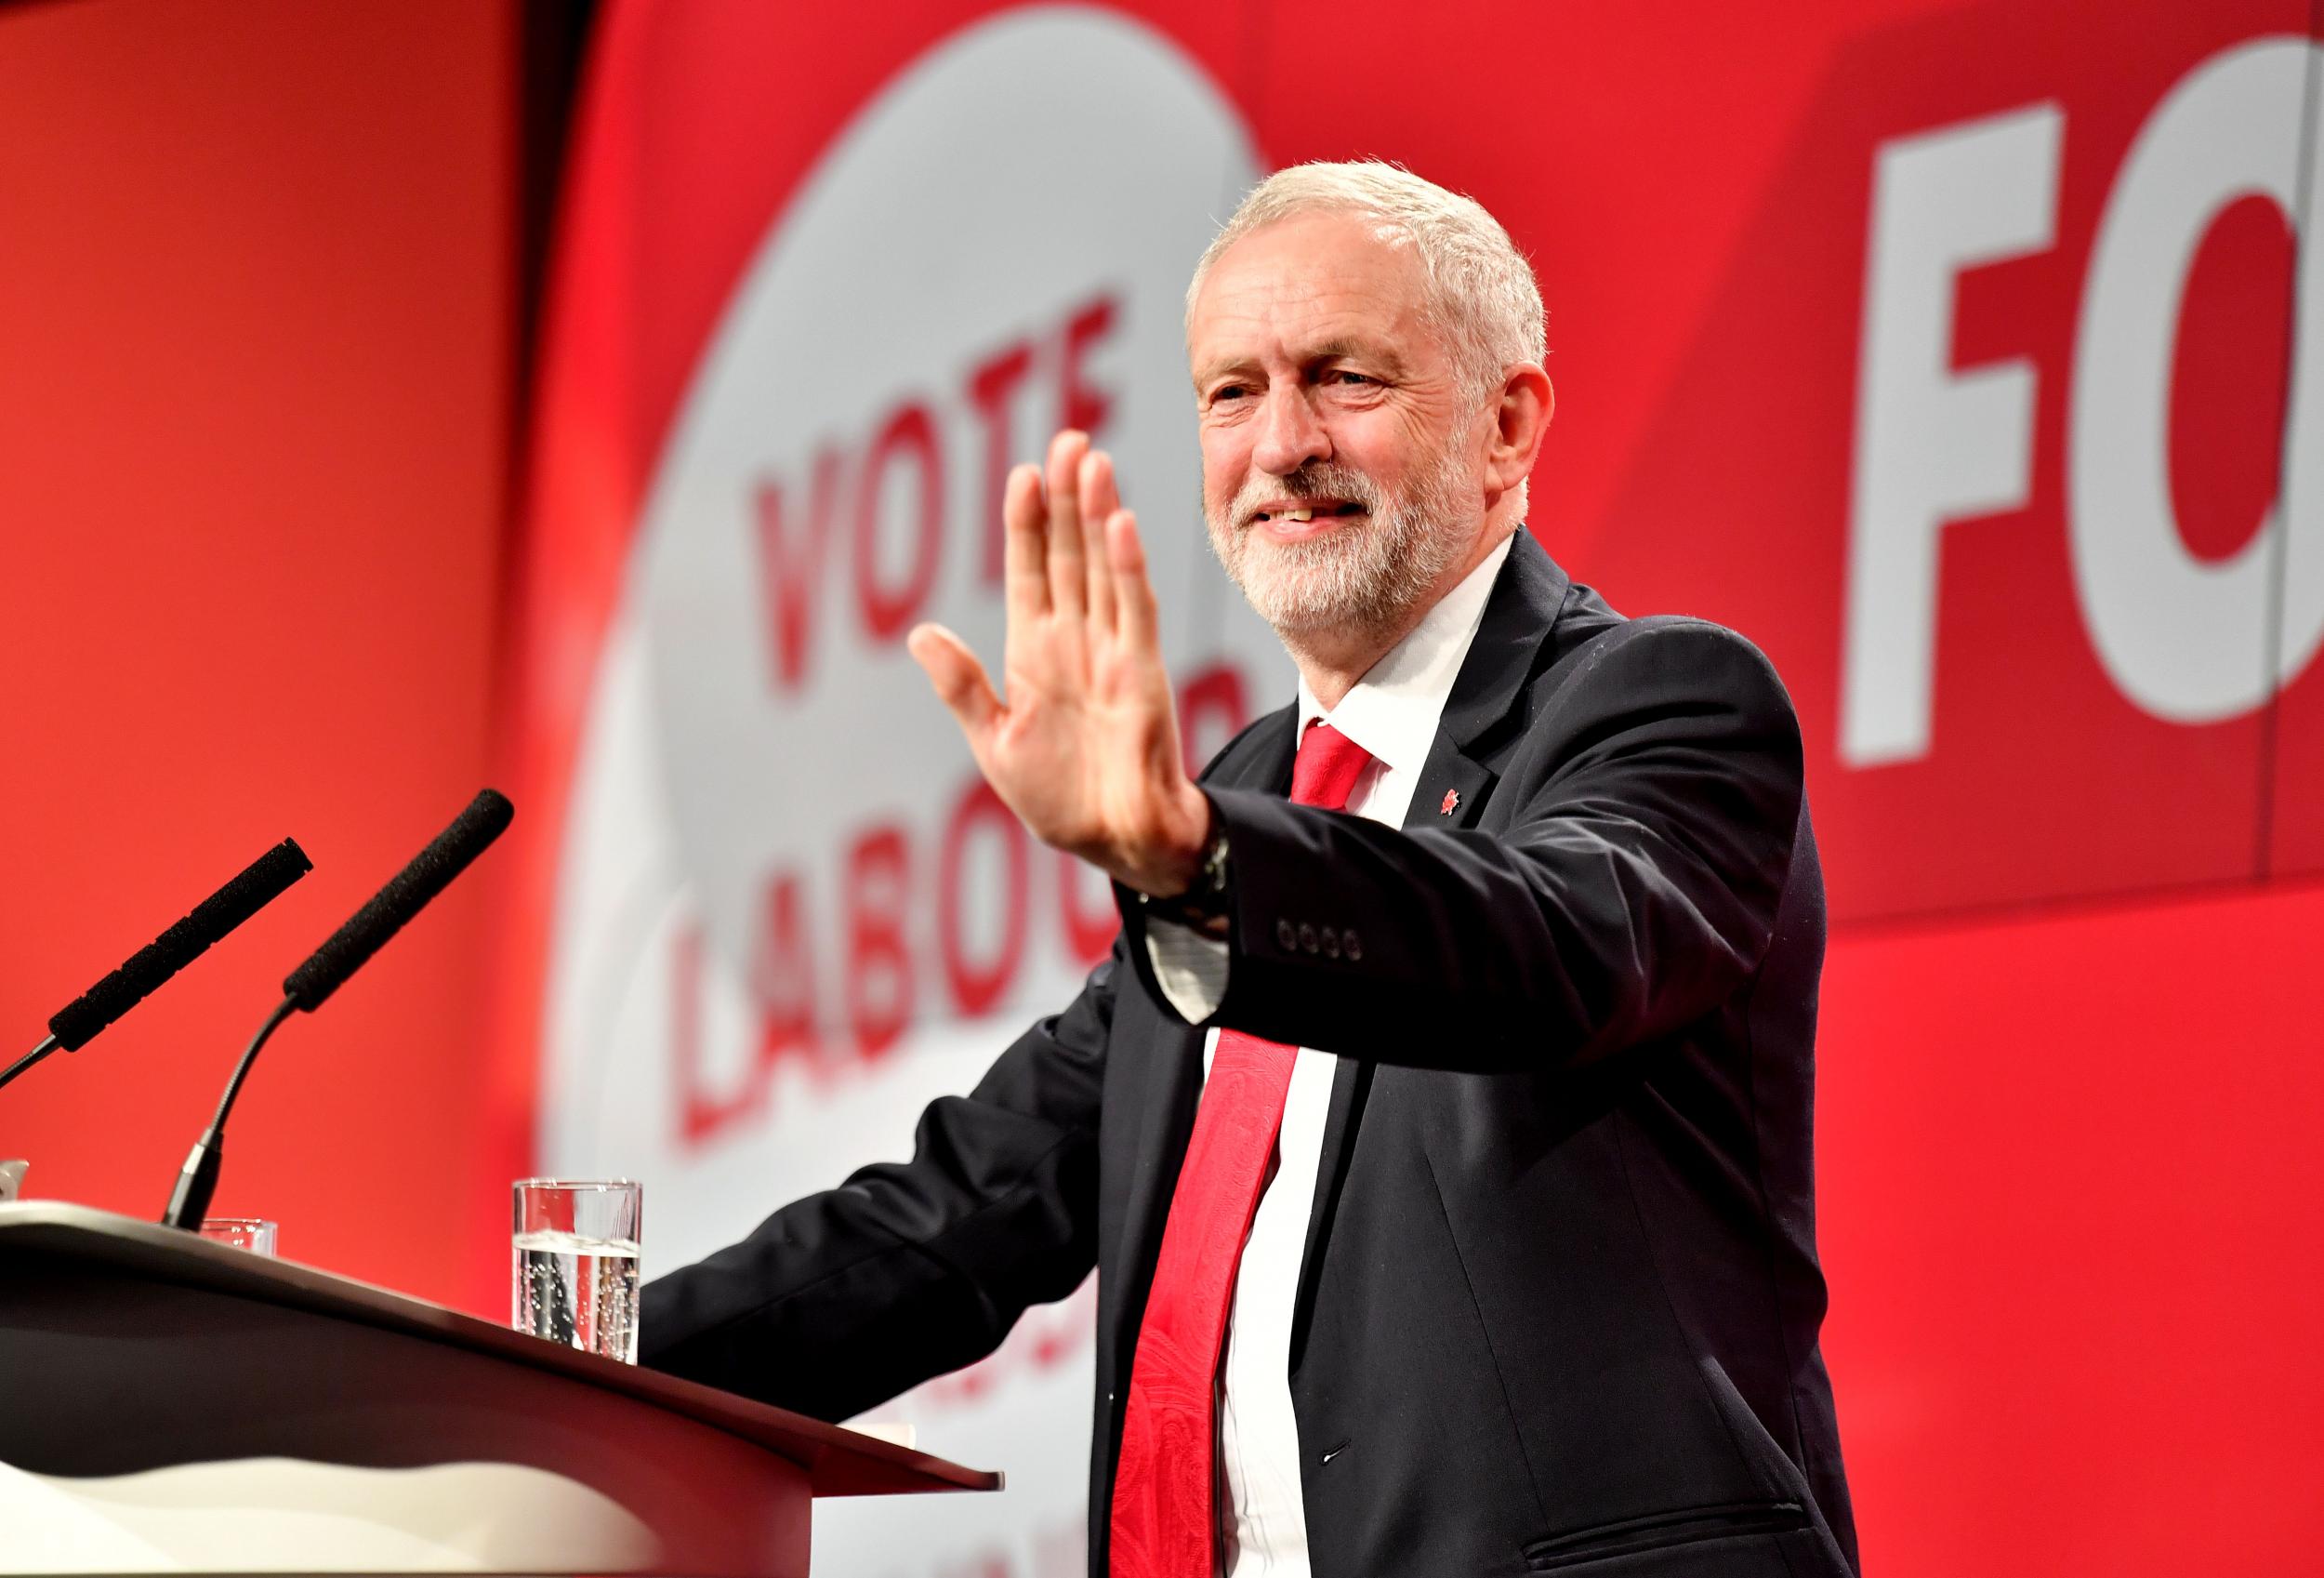 The Labour leader has vowed a government run by him would mean a ‘reckoning’ for Britain's elites and do away with an economy ‘rigged in favour of the rich and powerful’